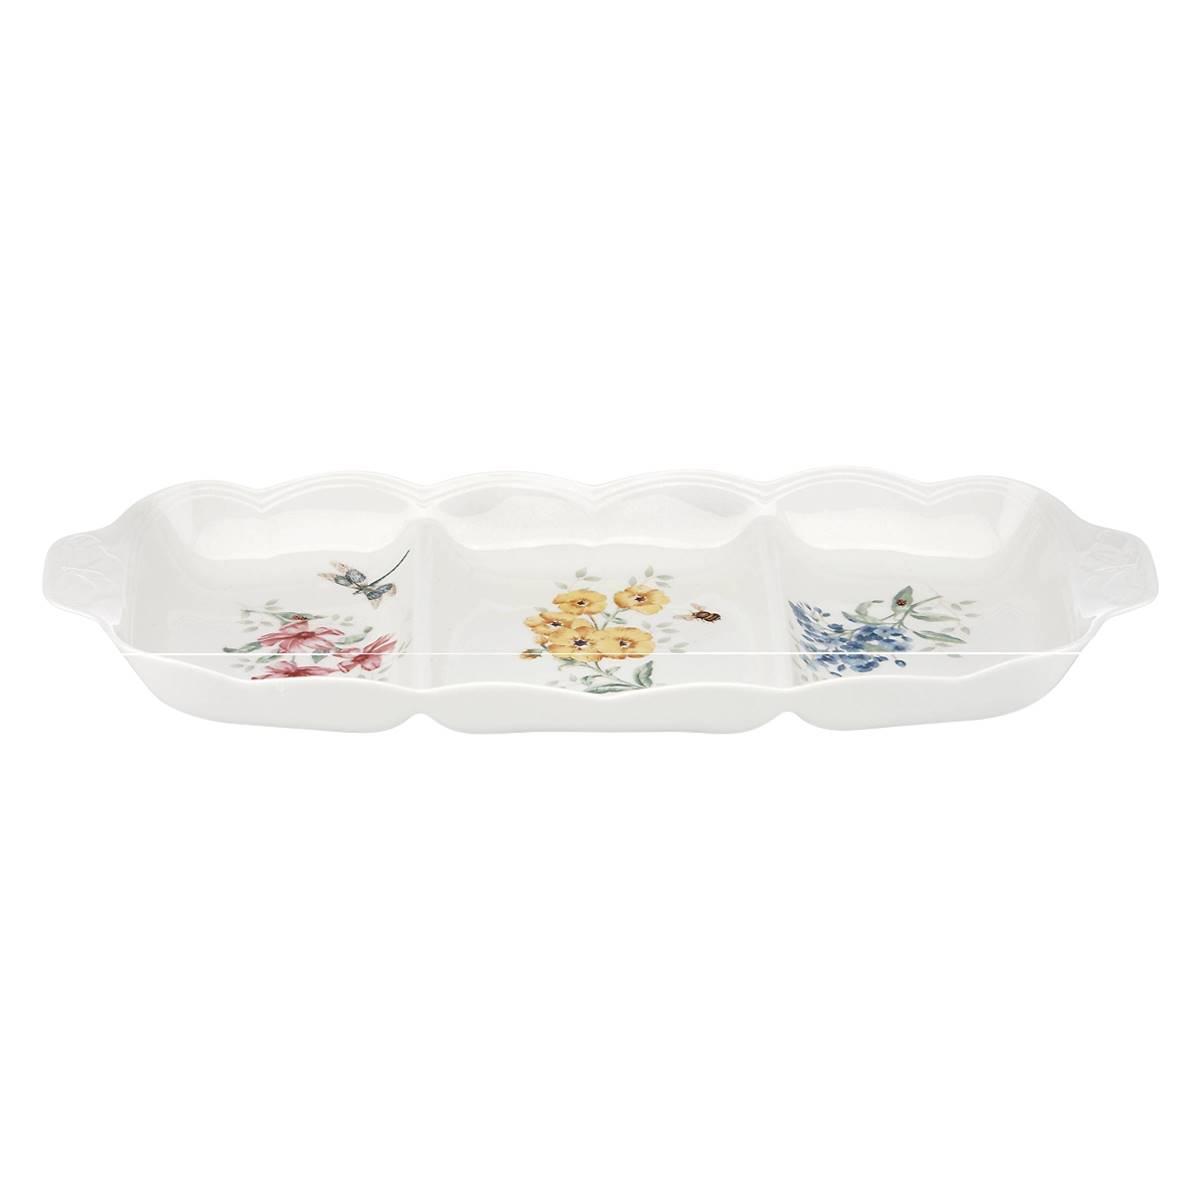 Lenox(R) Butterfly Meadow(tm) 3 Part Divided Serving Dish